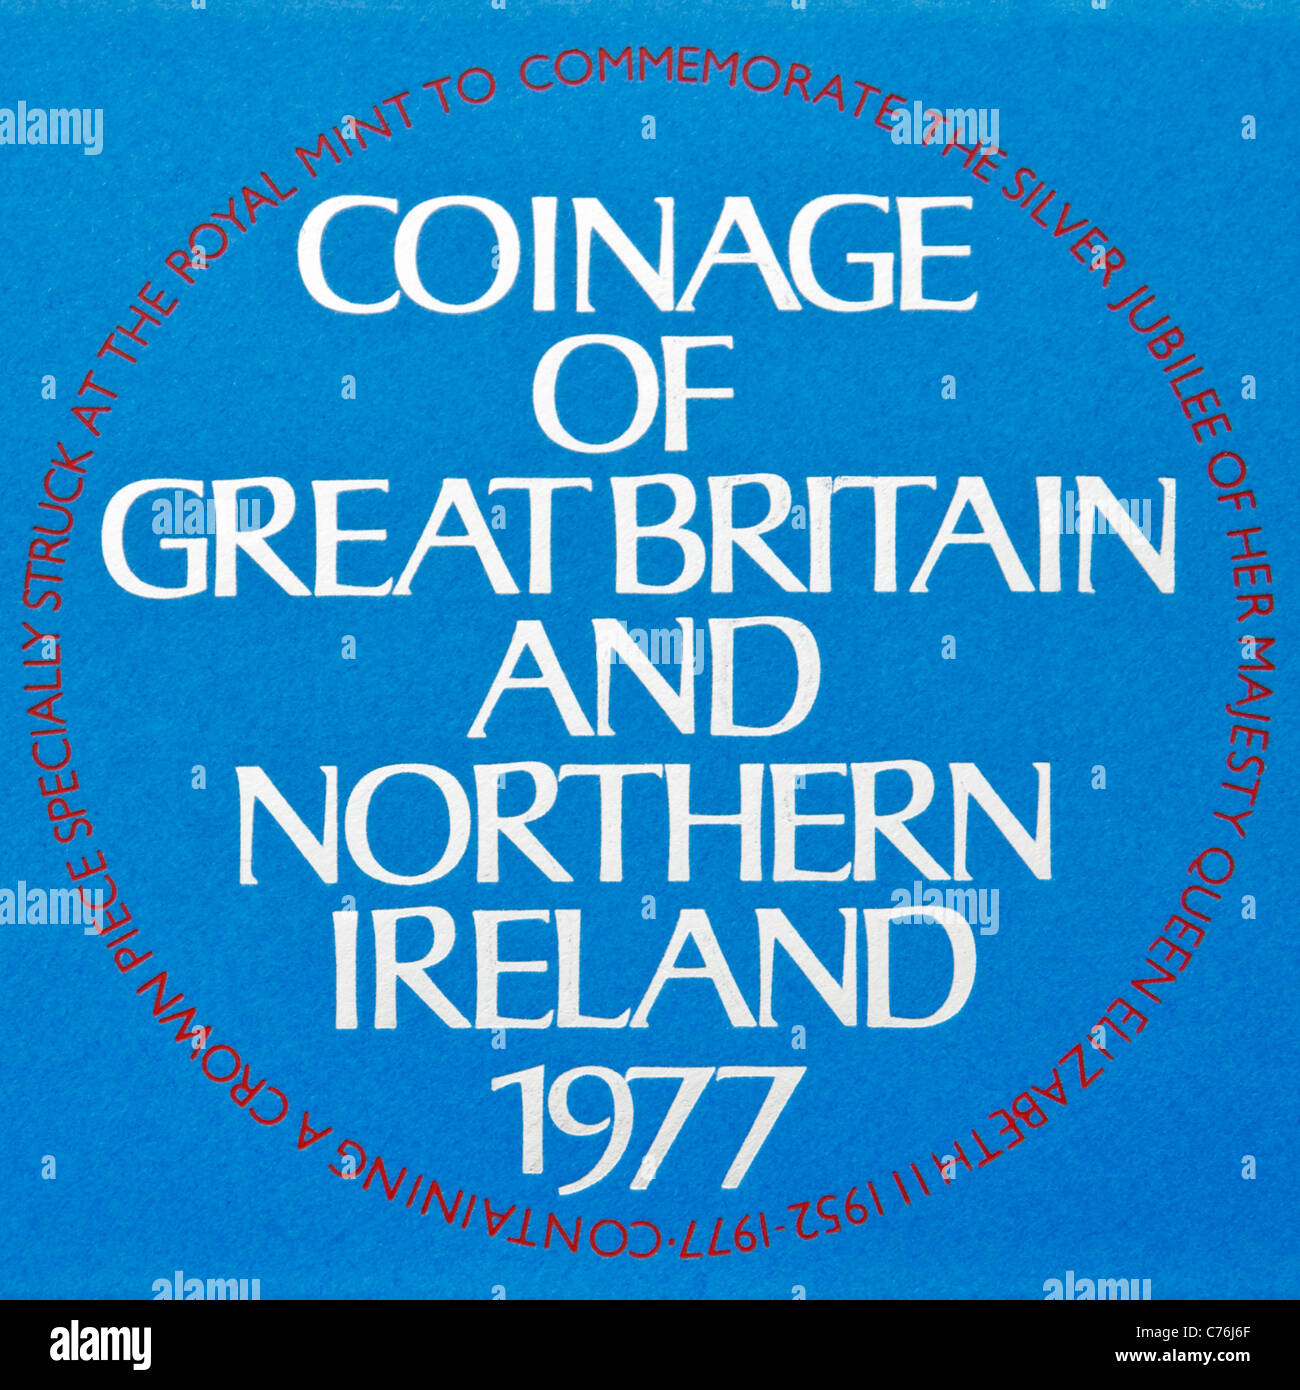 Royal Mint 1977 Coinage of Great Britain and Northern Ireland Stock Photo